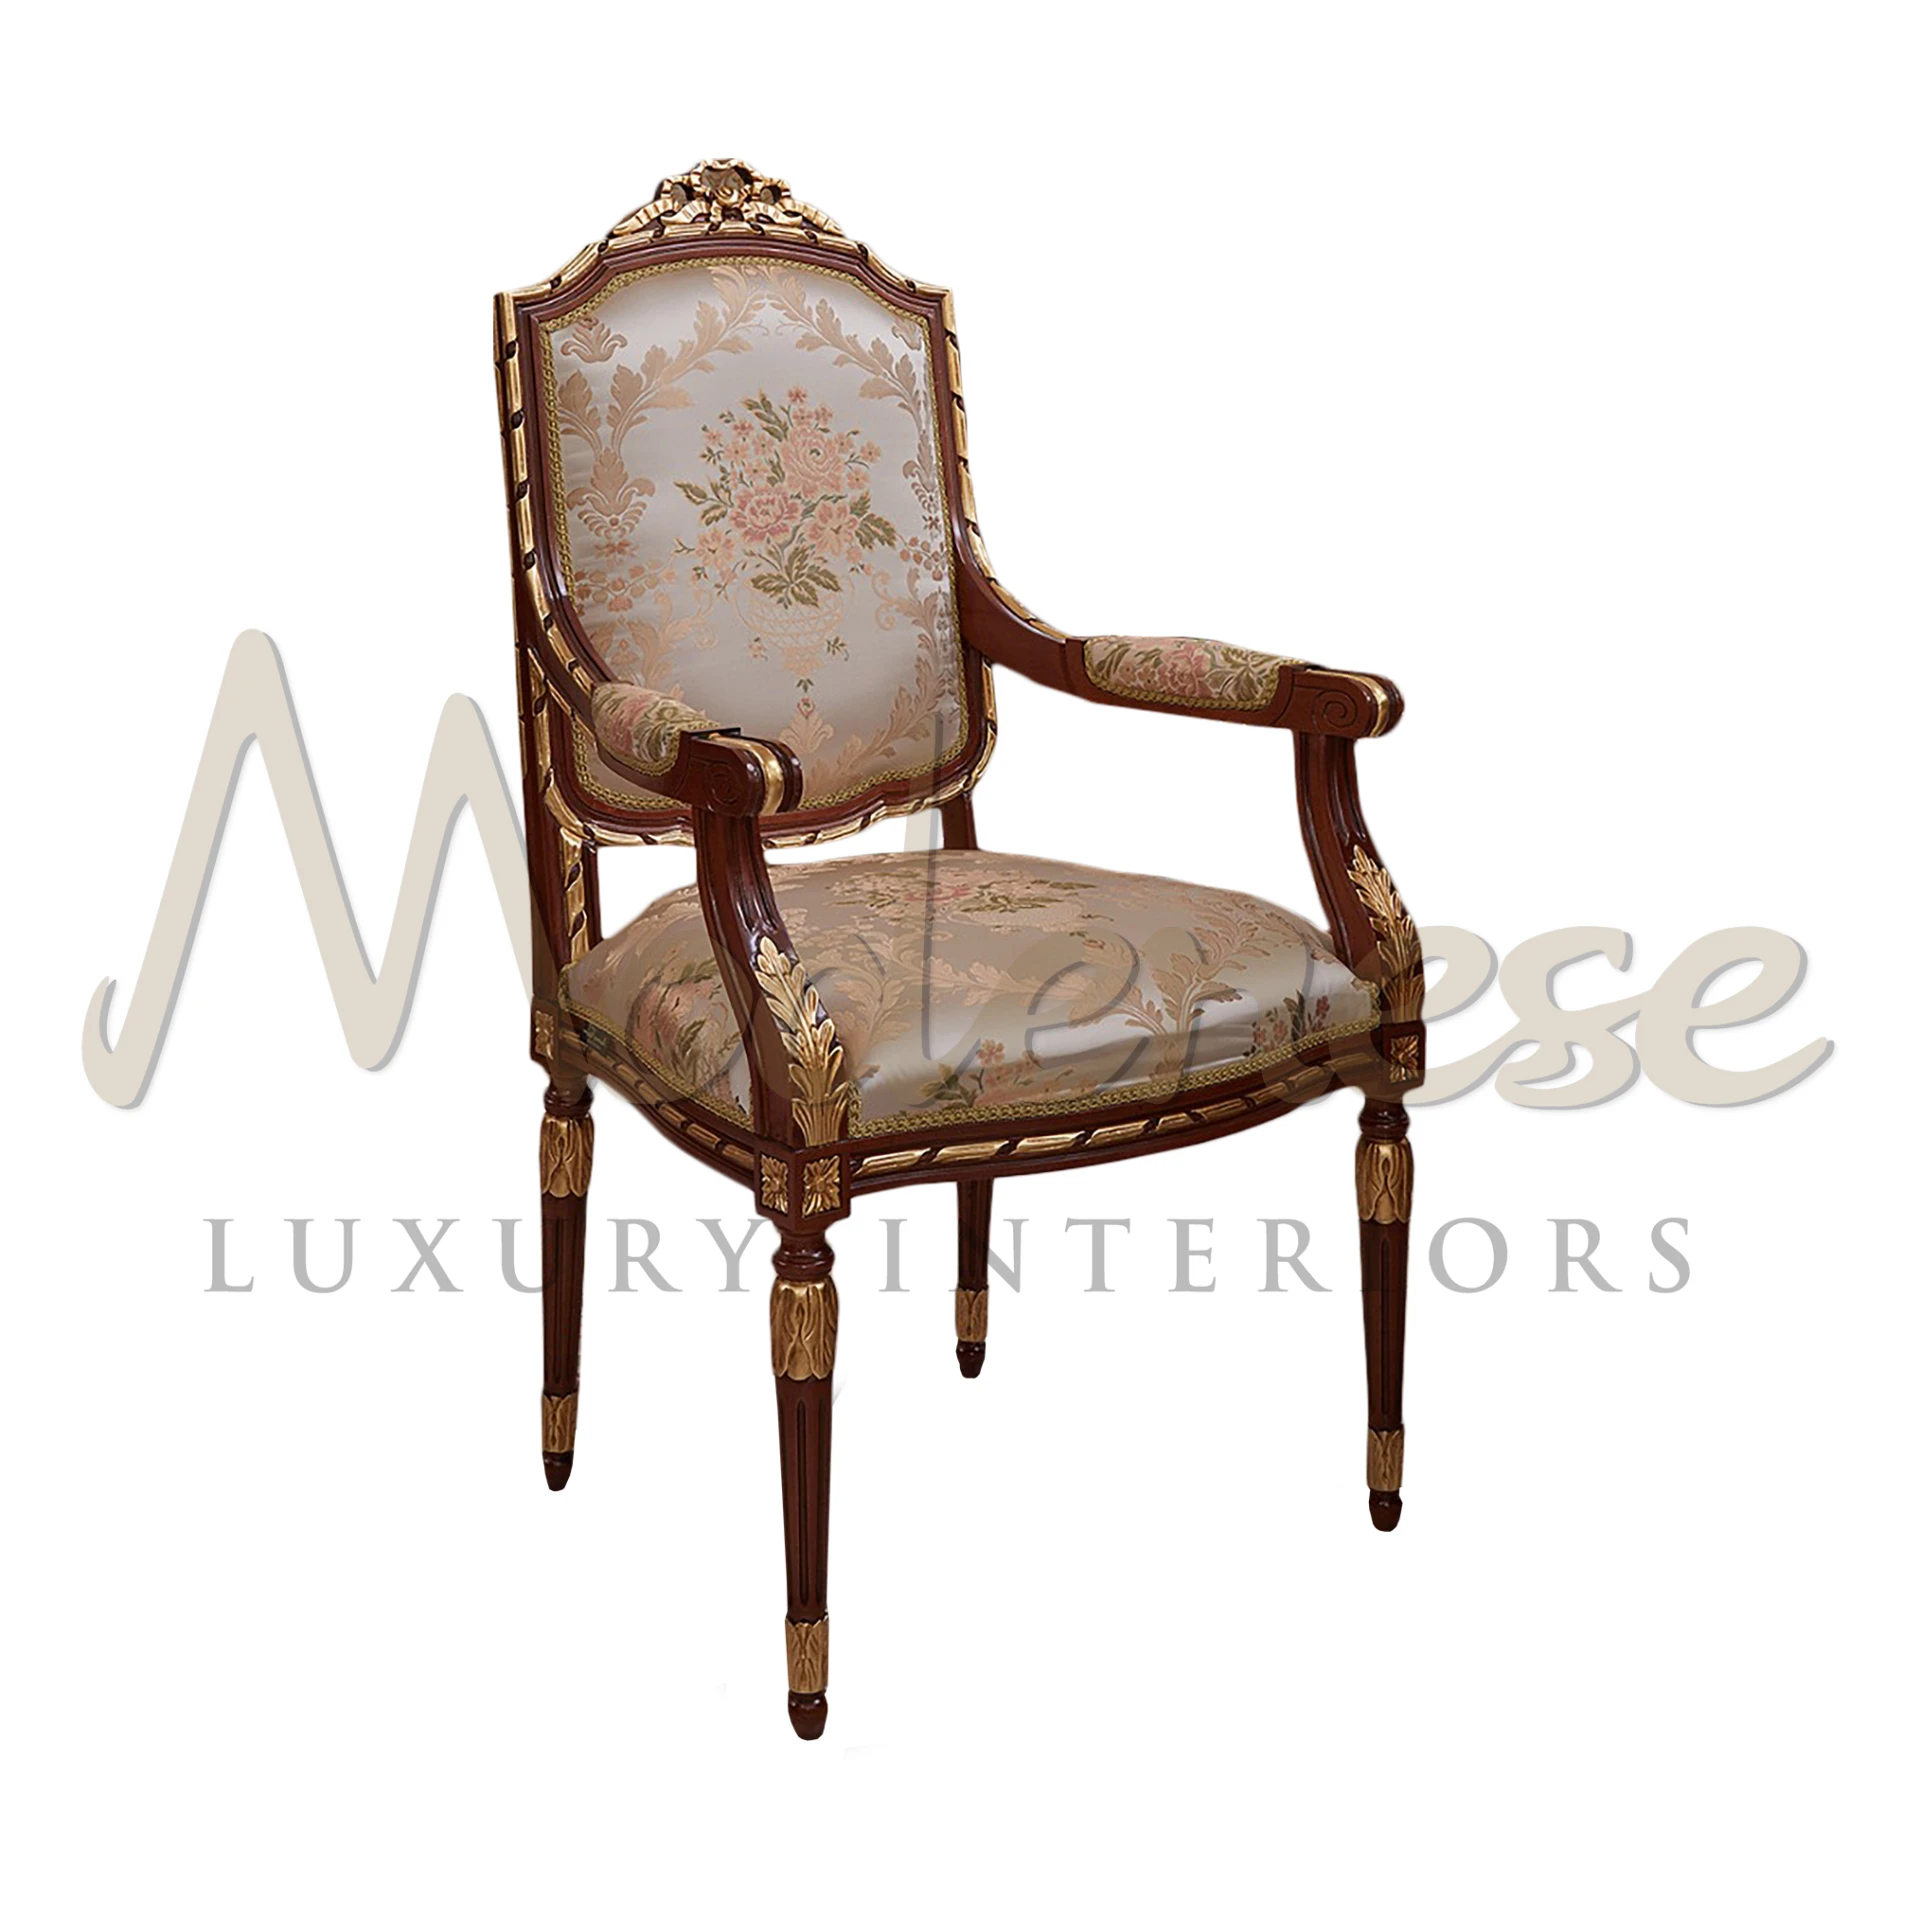 Indulge in comfort with this Modenese armchair. Luxurious wood frame with gold leaf accents and premium floral upholstery in pink hues.